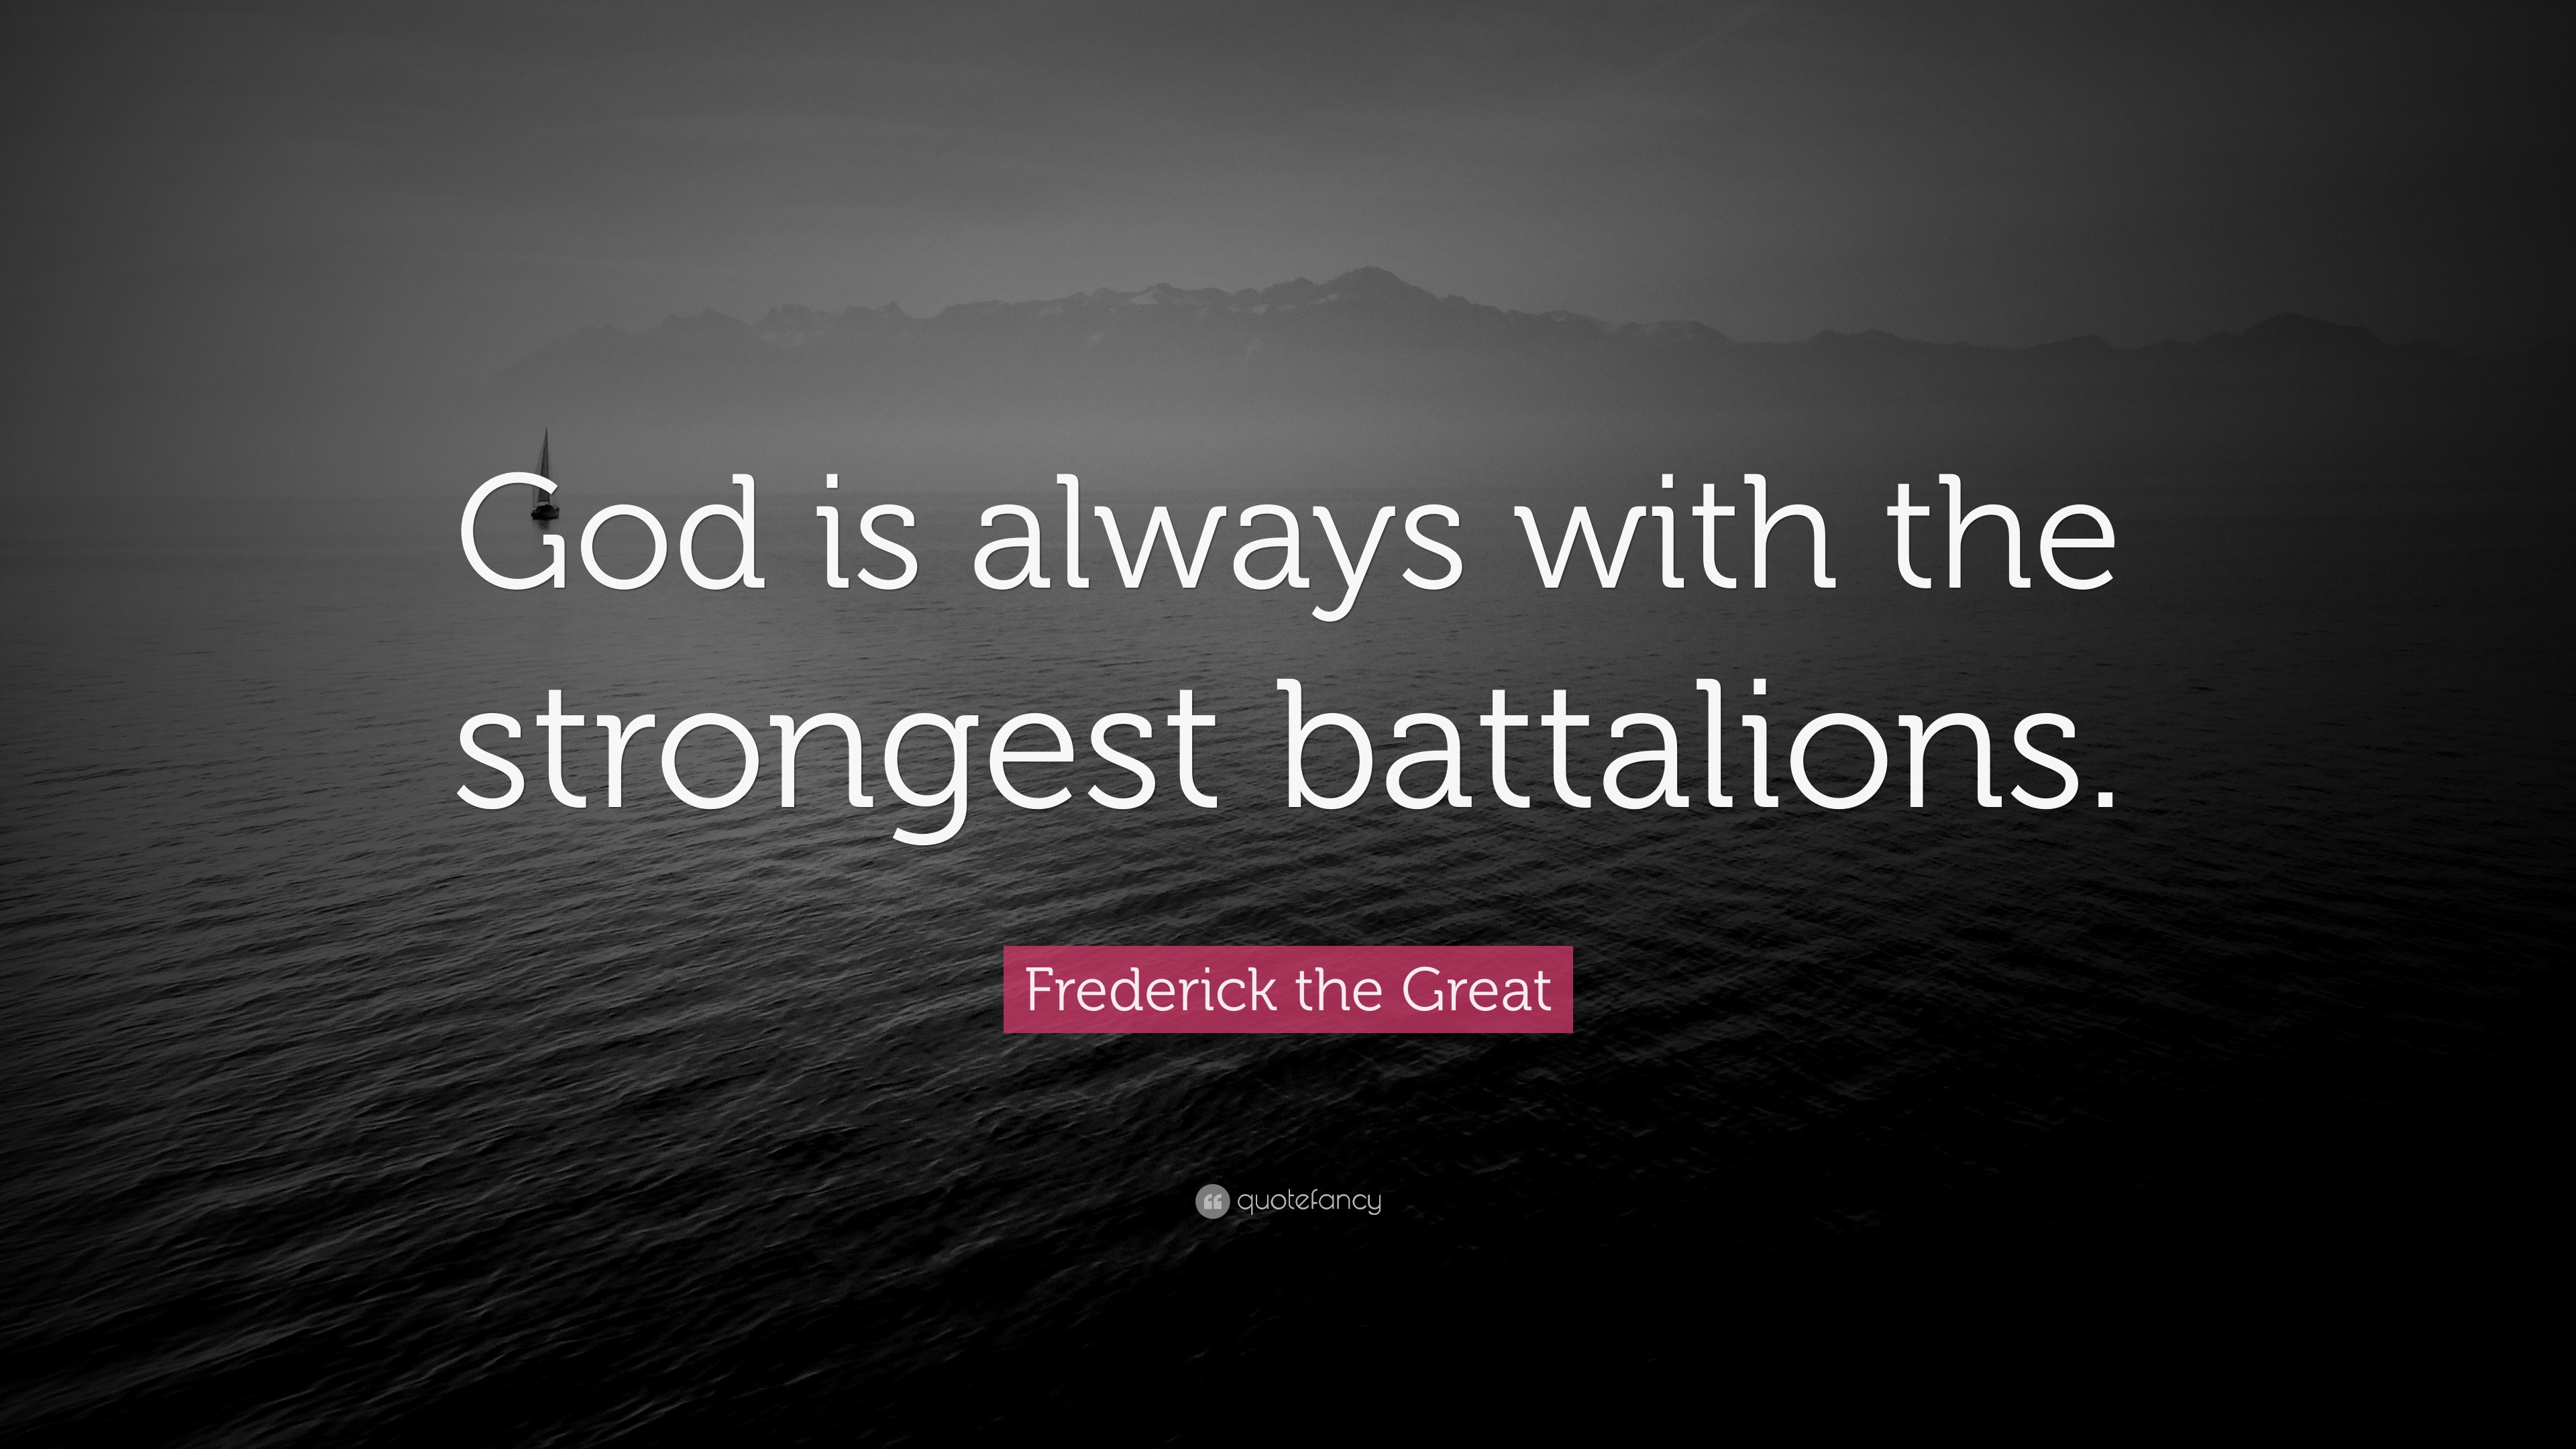 Frederick the Great Quote: “God is always with the strongest battalions.”